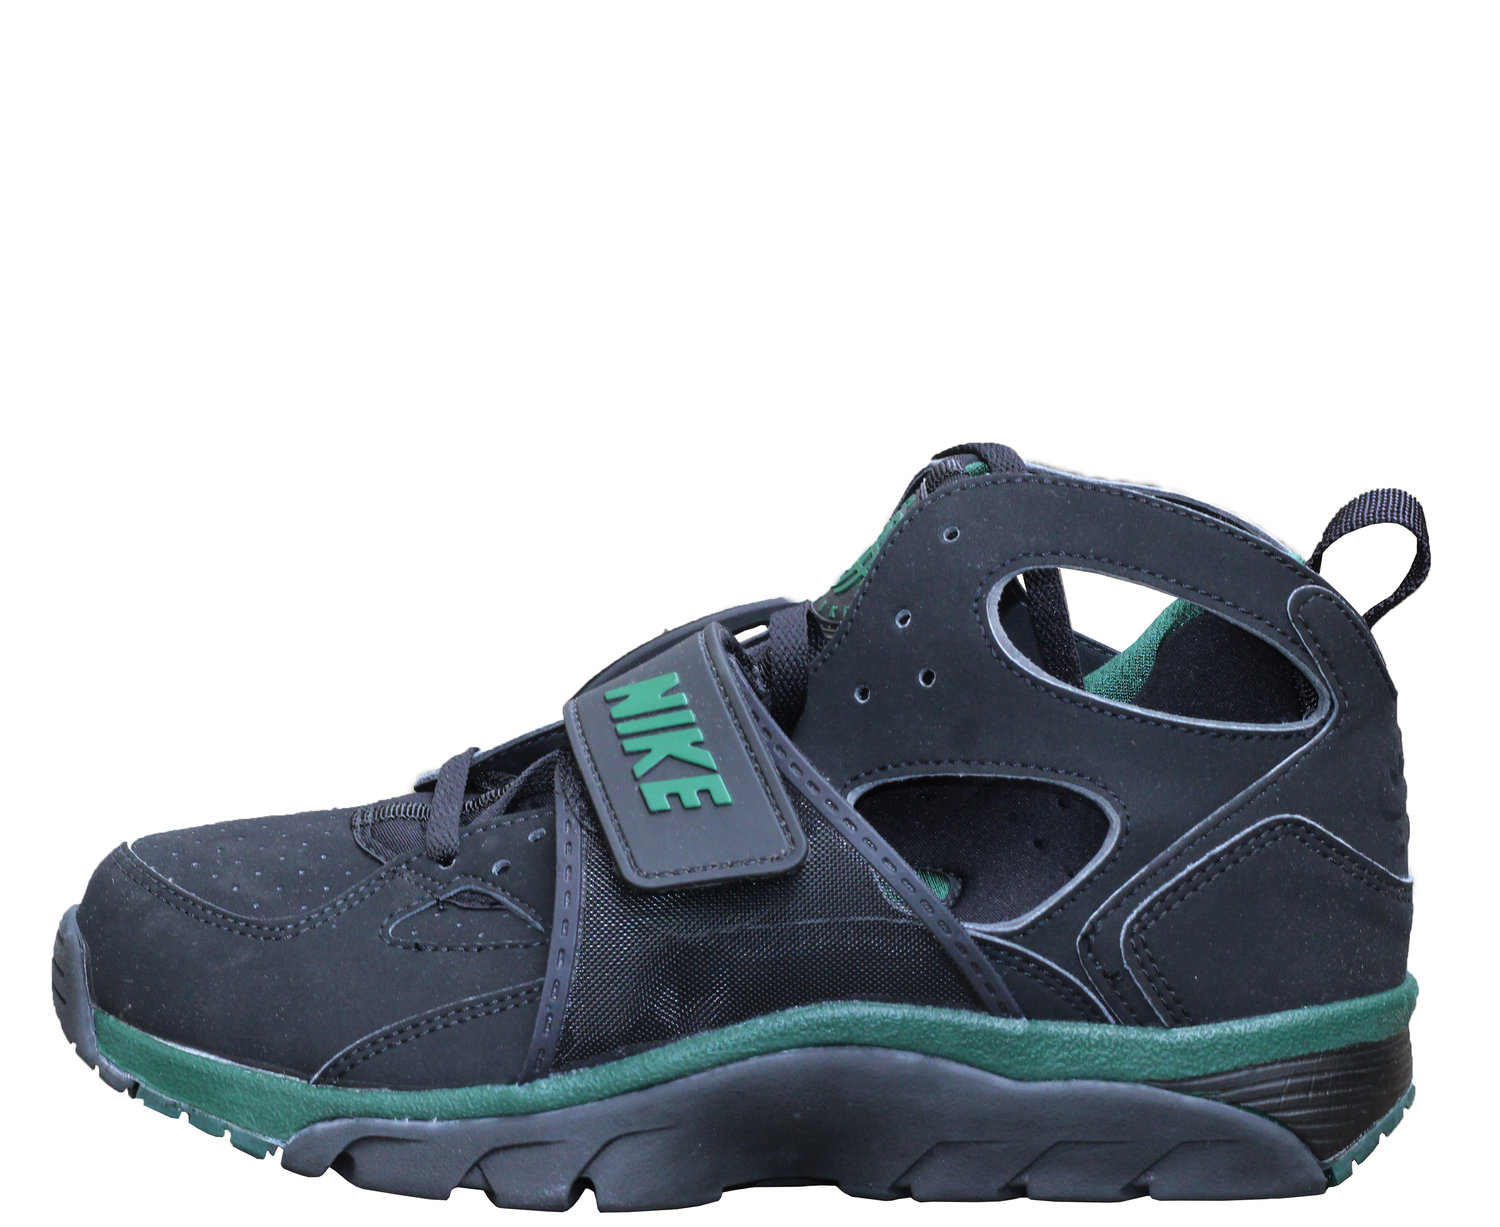 Nike Air Trainer Huarache Black / Forest DS —